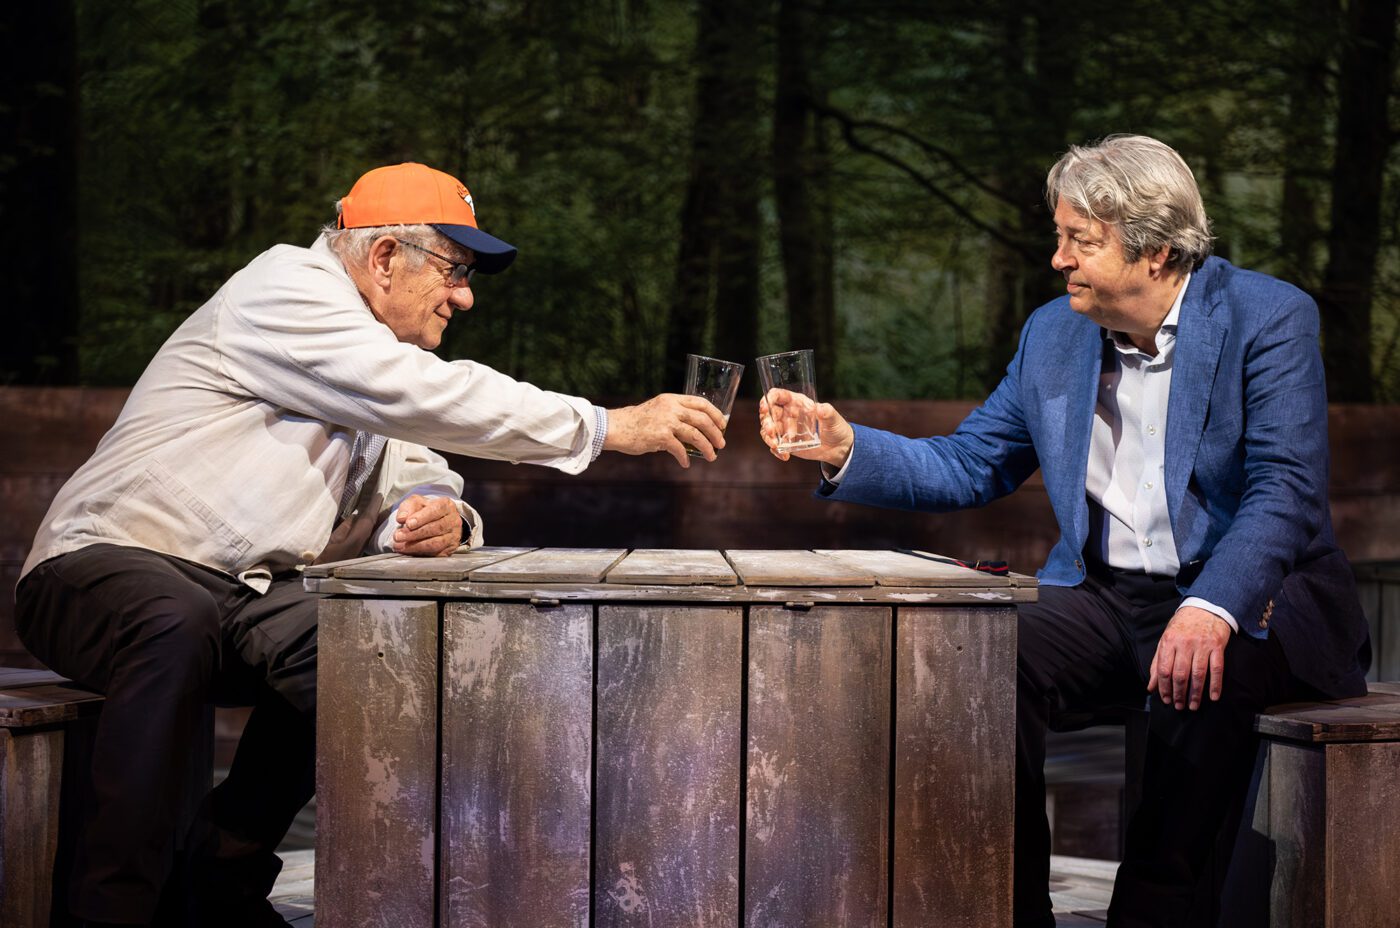 Ian McKellen and Roger Allan on stage toasting glasses.